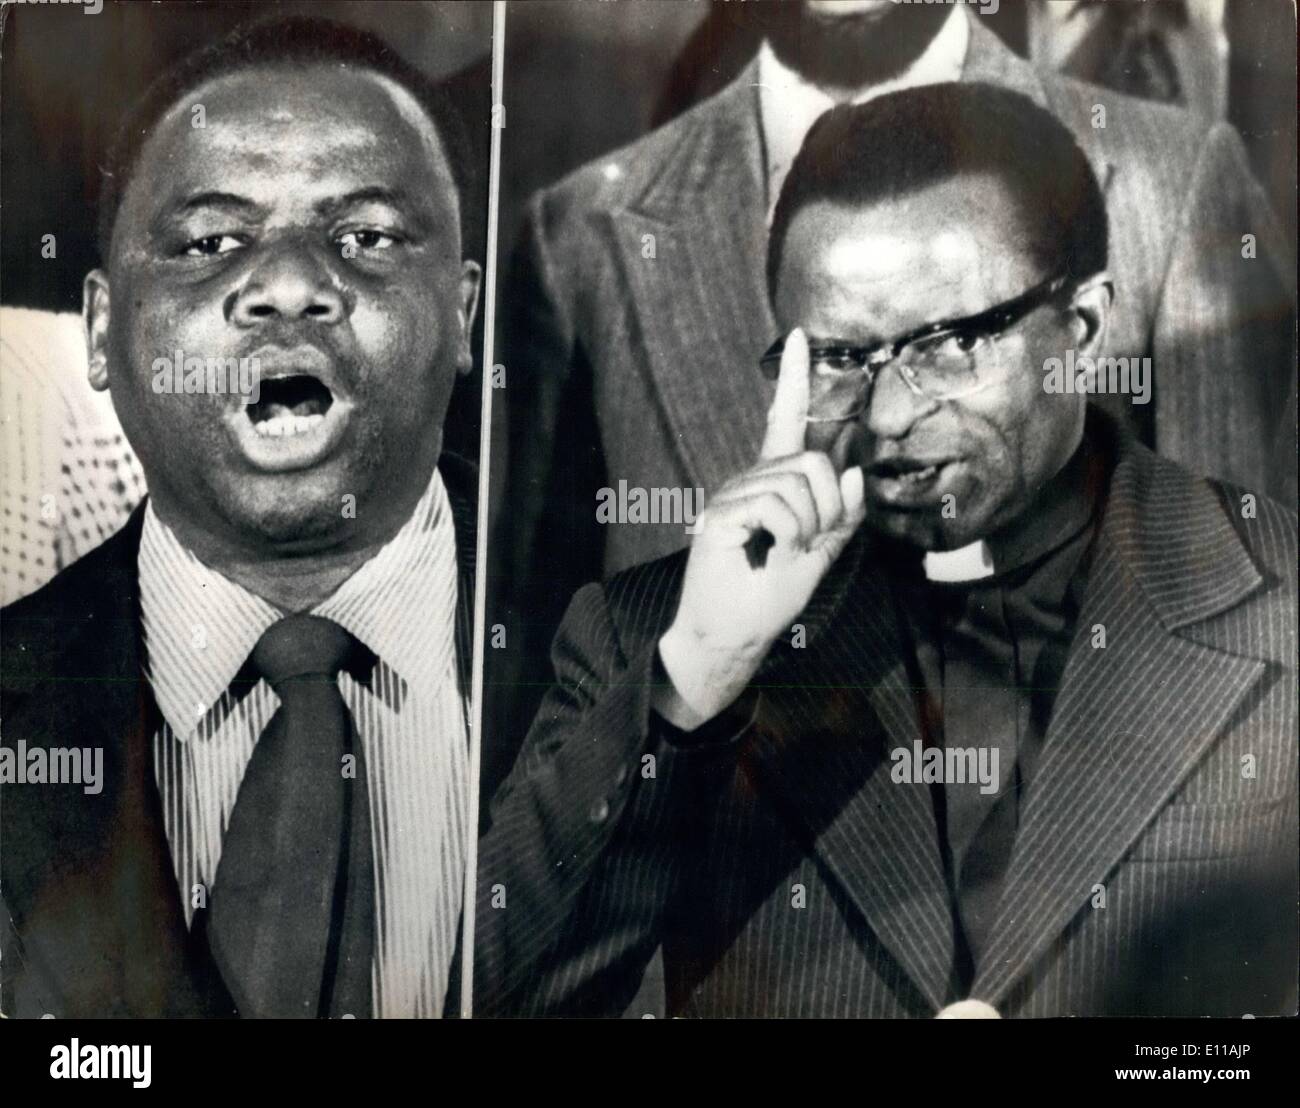 Oct. 10, 1976 - African Nationalist Leaders Arrive in Geneva fro Thursday's Rhodesia Conference. Bishop Muzorewa, one of the African Nationalist Leaders and the Reverend Ndabaningi Sithole, the veteran guerilla leader, both arrived in Geneva today for the Rhodesia Conference which takes place there on Thursday, October 28th. Photo Shows: The Rev. Ndabaningi Sithole (left) and Bishop Muzorewa (right) pictured when they gave separate press conference soon after their arrival in Geneva today. Stock Photo